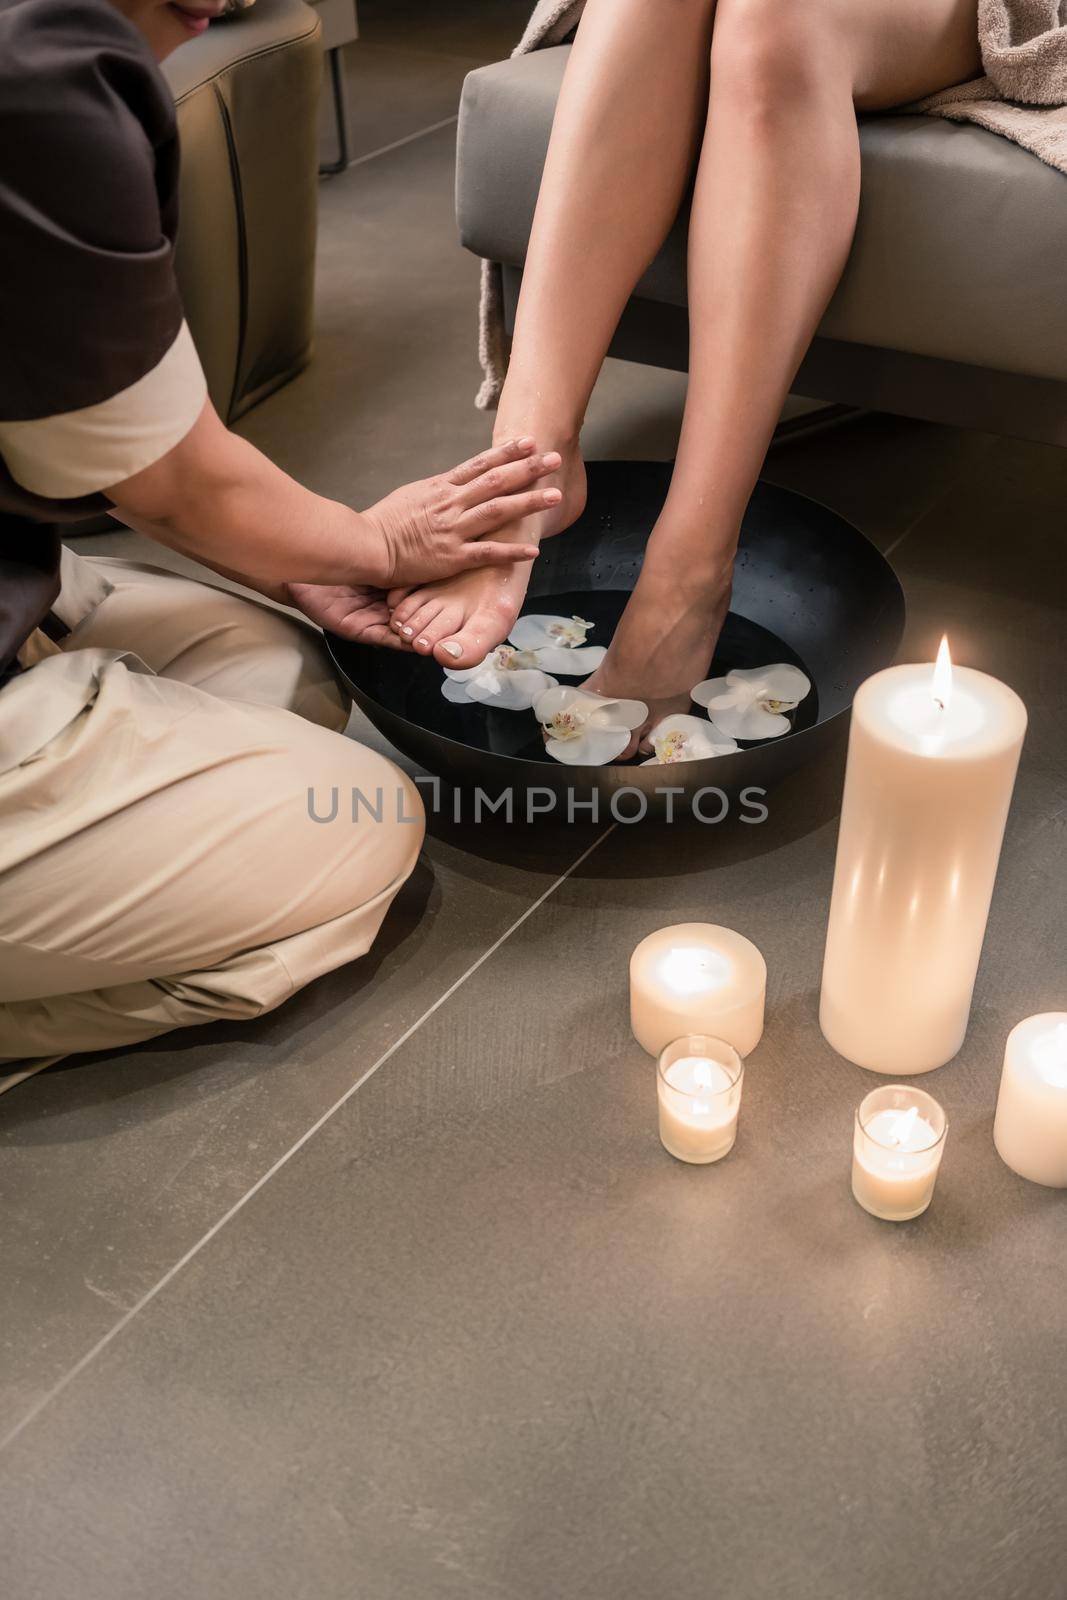 Hands of an Asian therapist during foot washing treatment by Kzenon